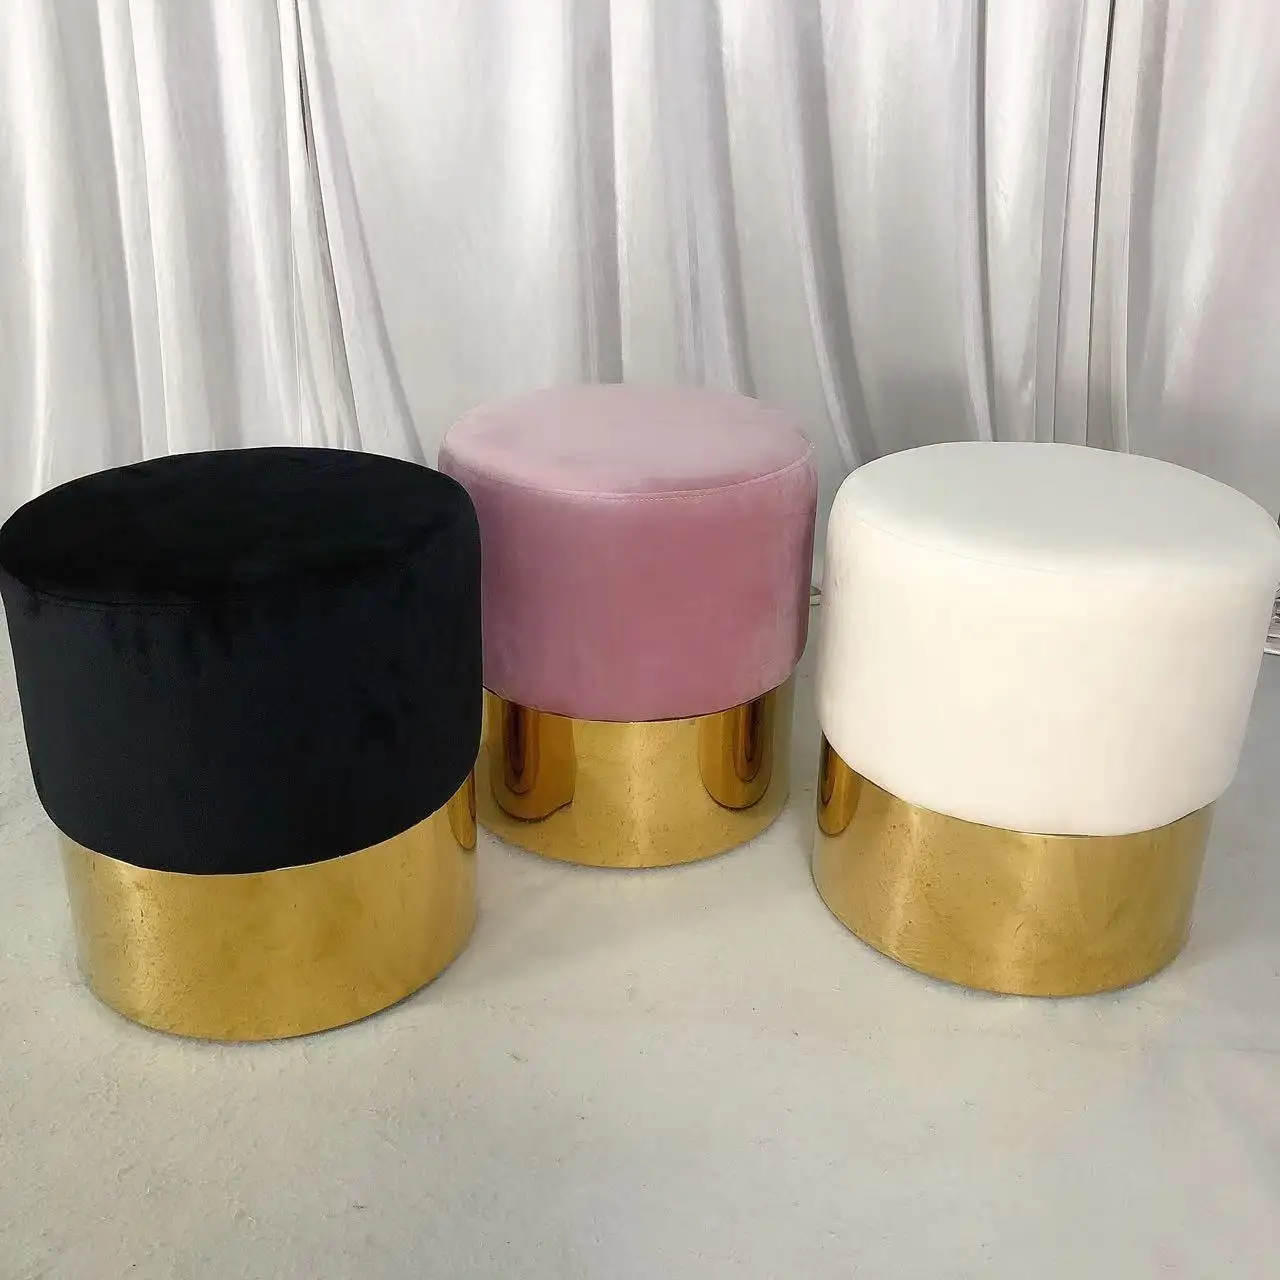 White velvet Small Stools for Kids sitting stool event Party Baby Shower Wedding Furniture Rentals